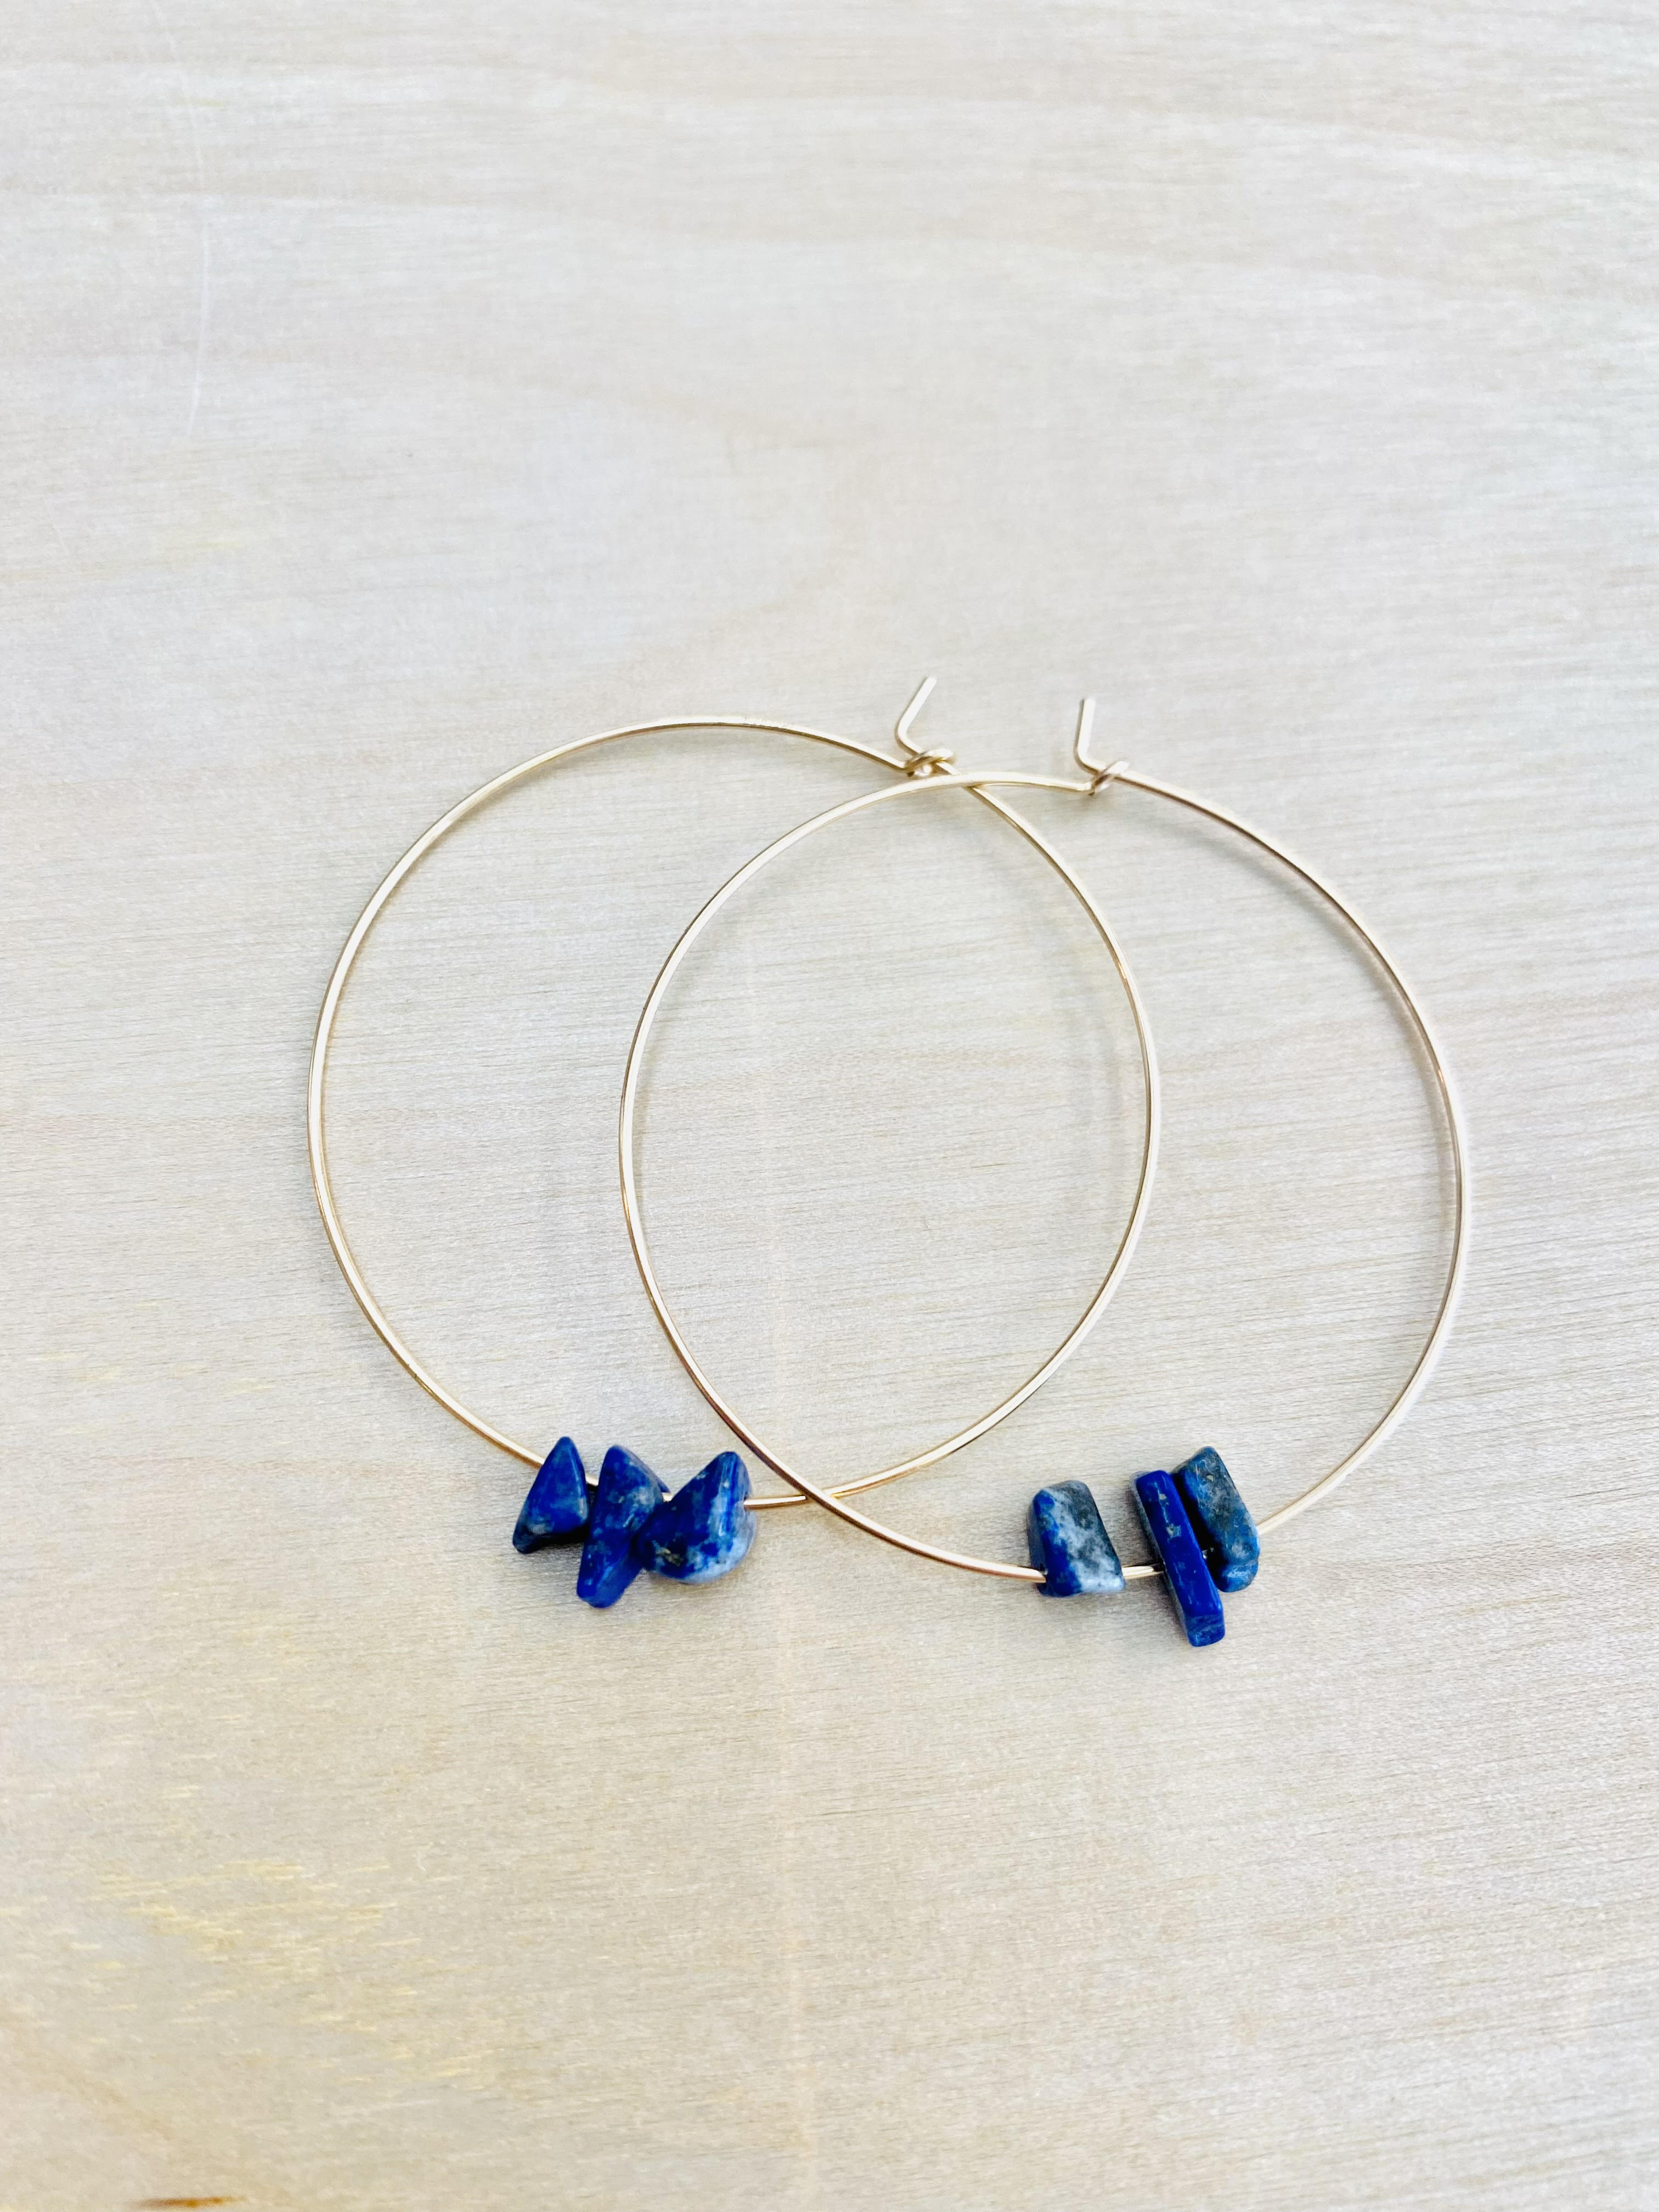 Tiny Crystal Hoop Earrings - 45mm (Gold Filled)